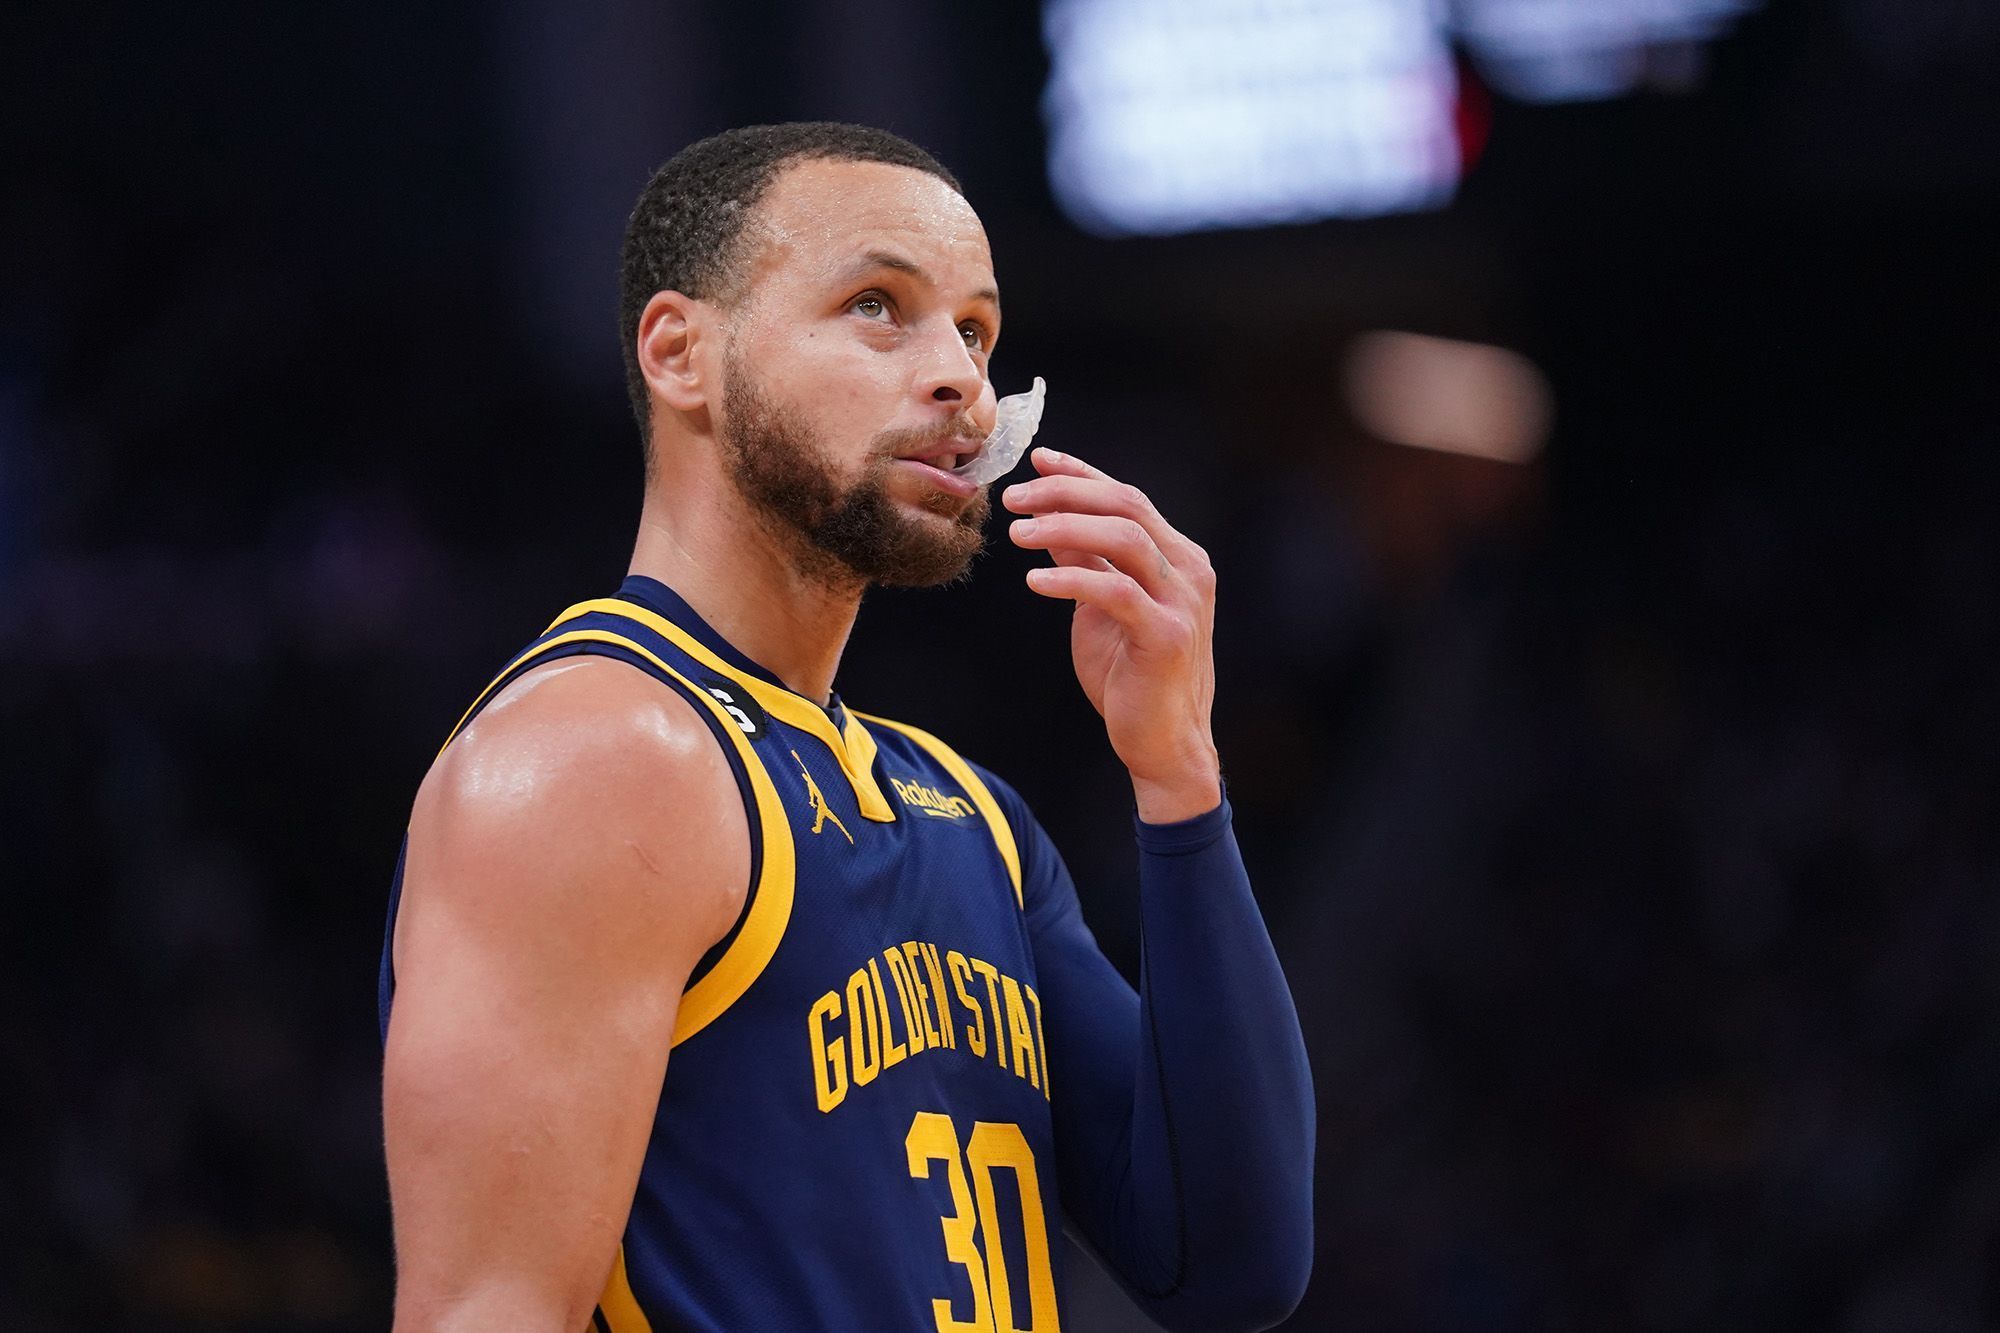 STEPH CURRY IN HOSPITAL AFTER HEART ATTACK